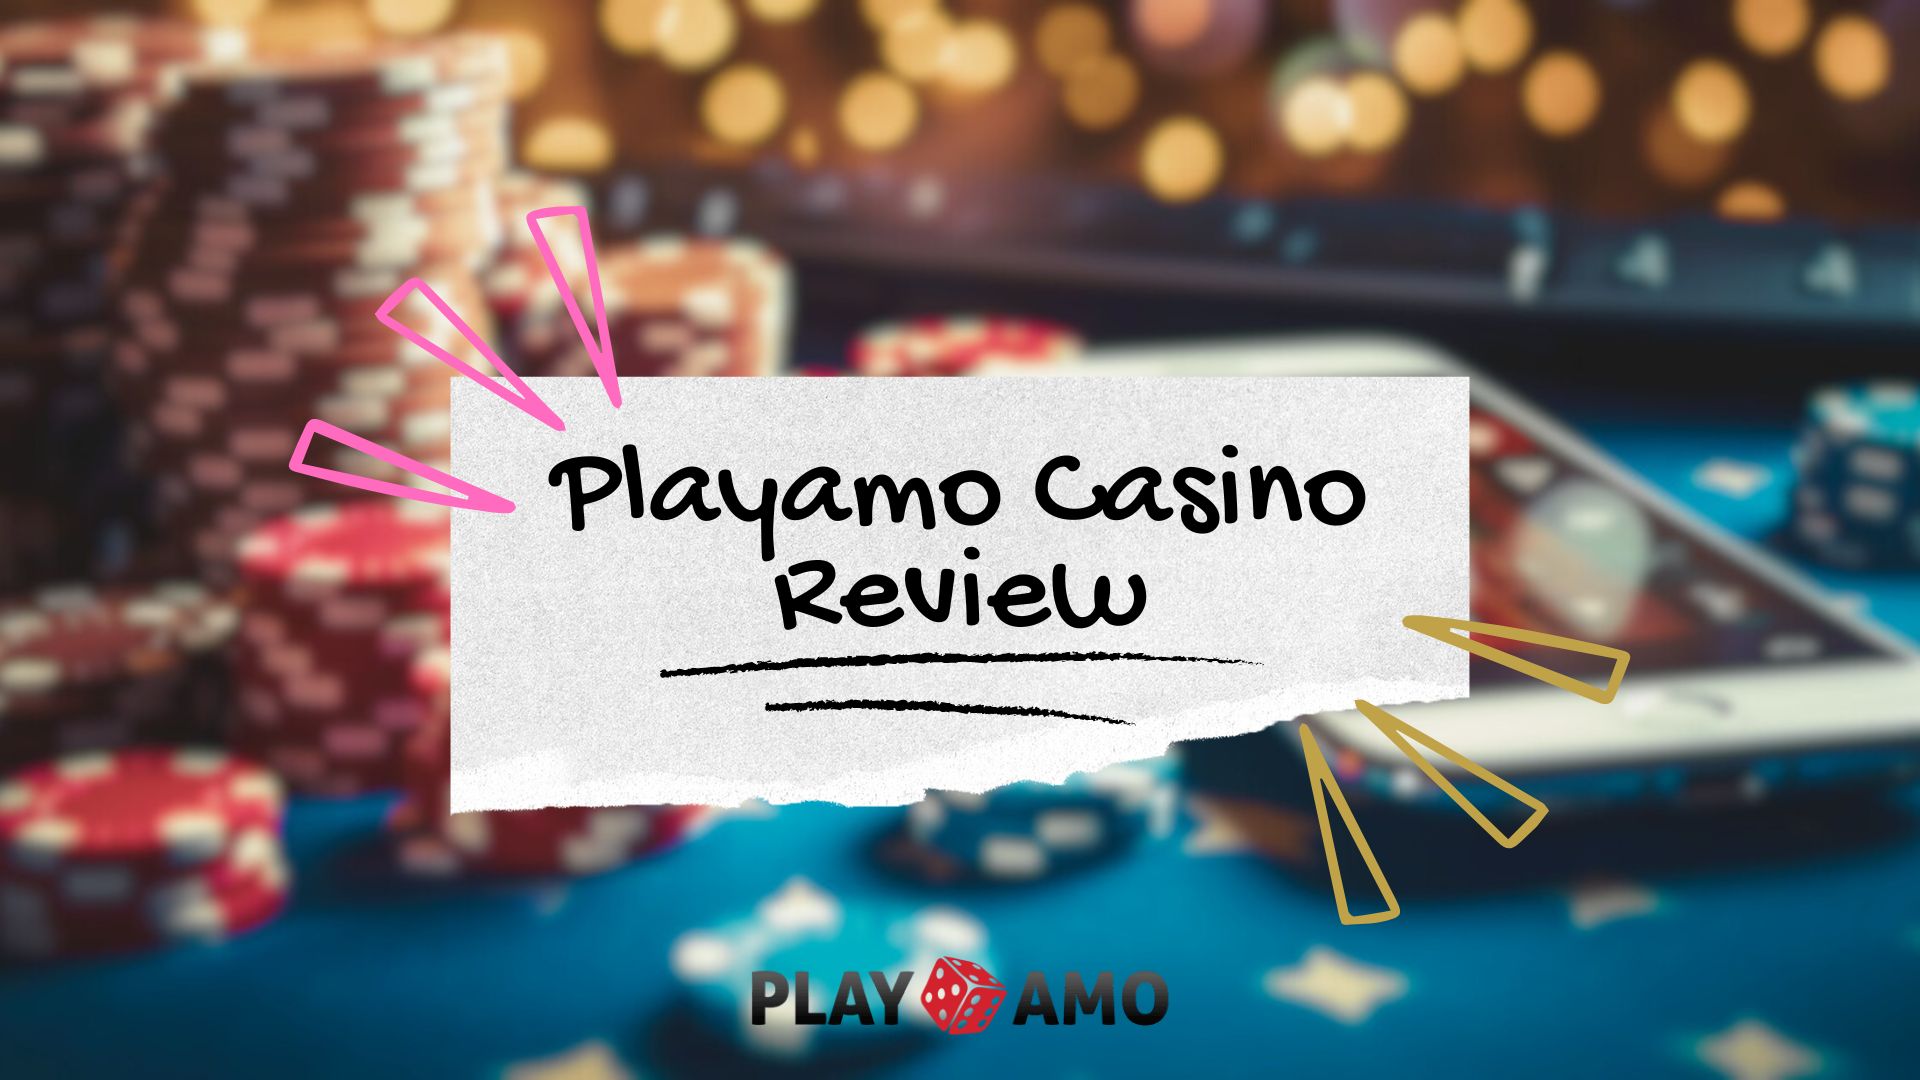 Playamo Casino Review: A Quick Look